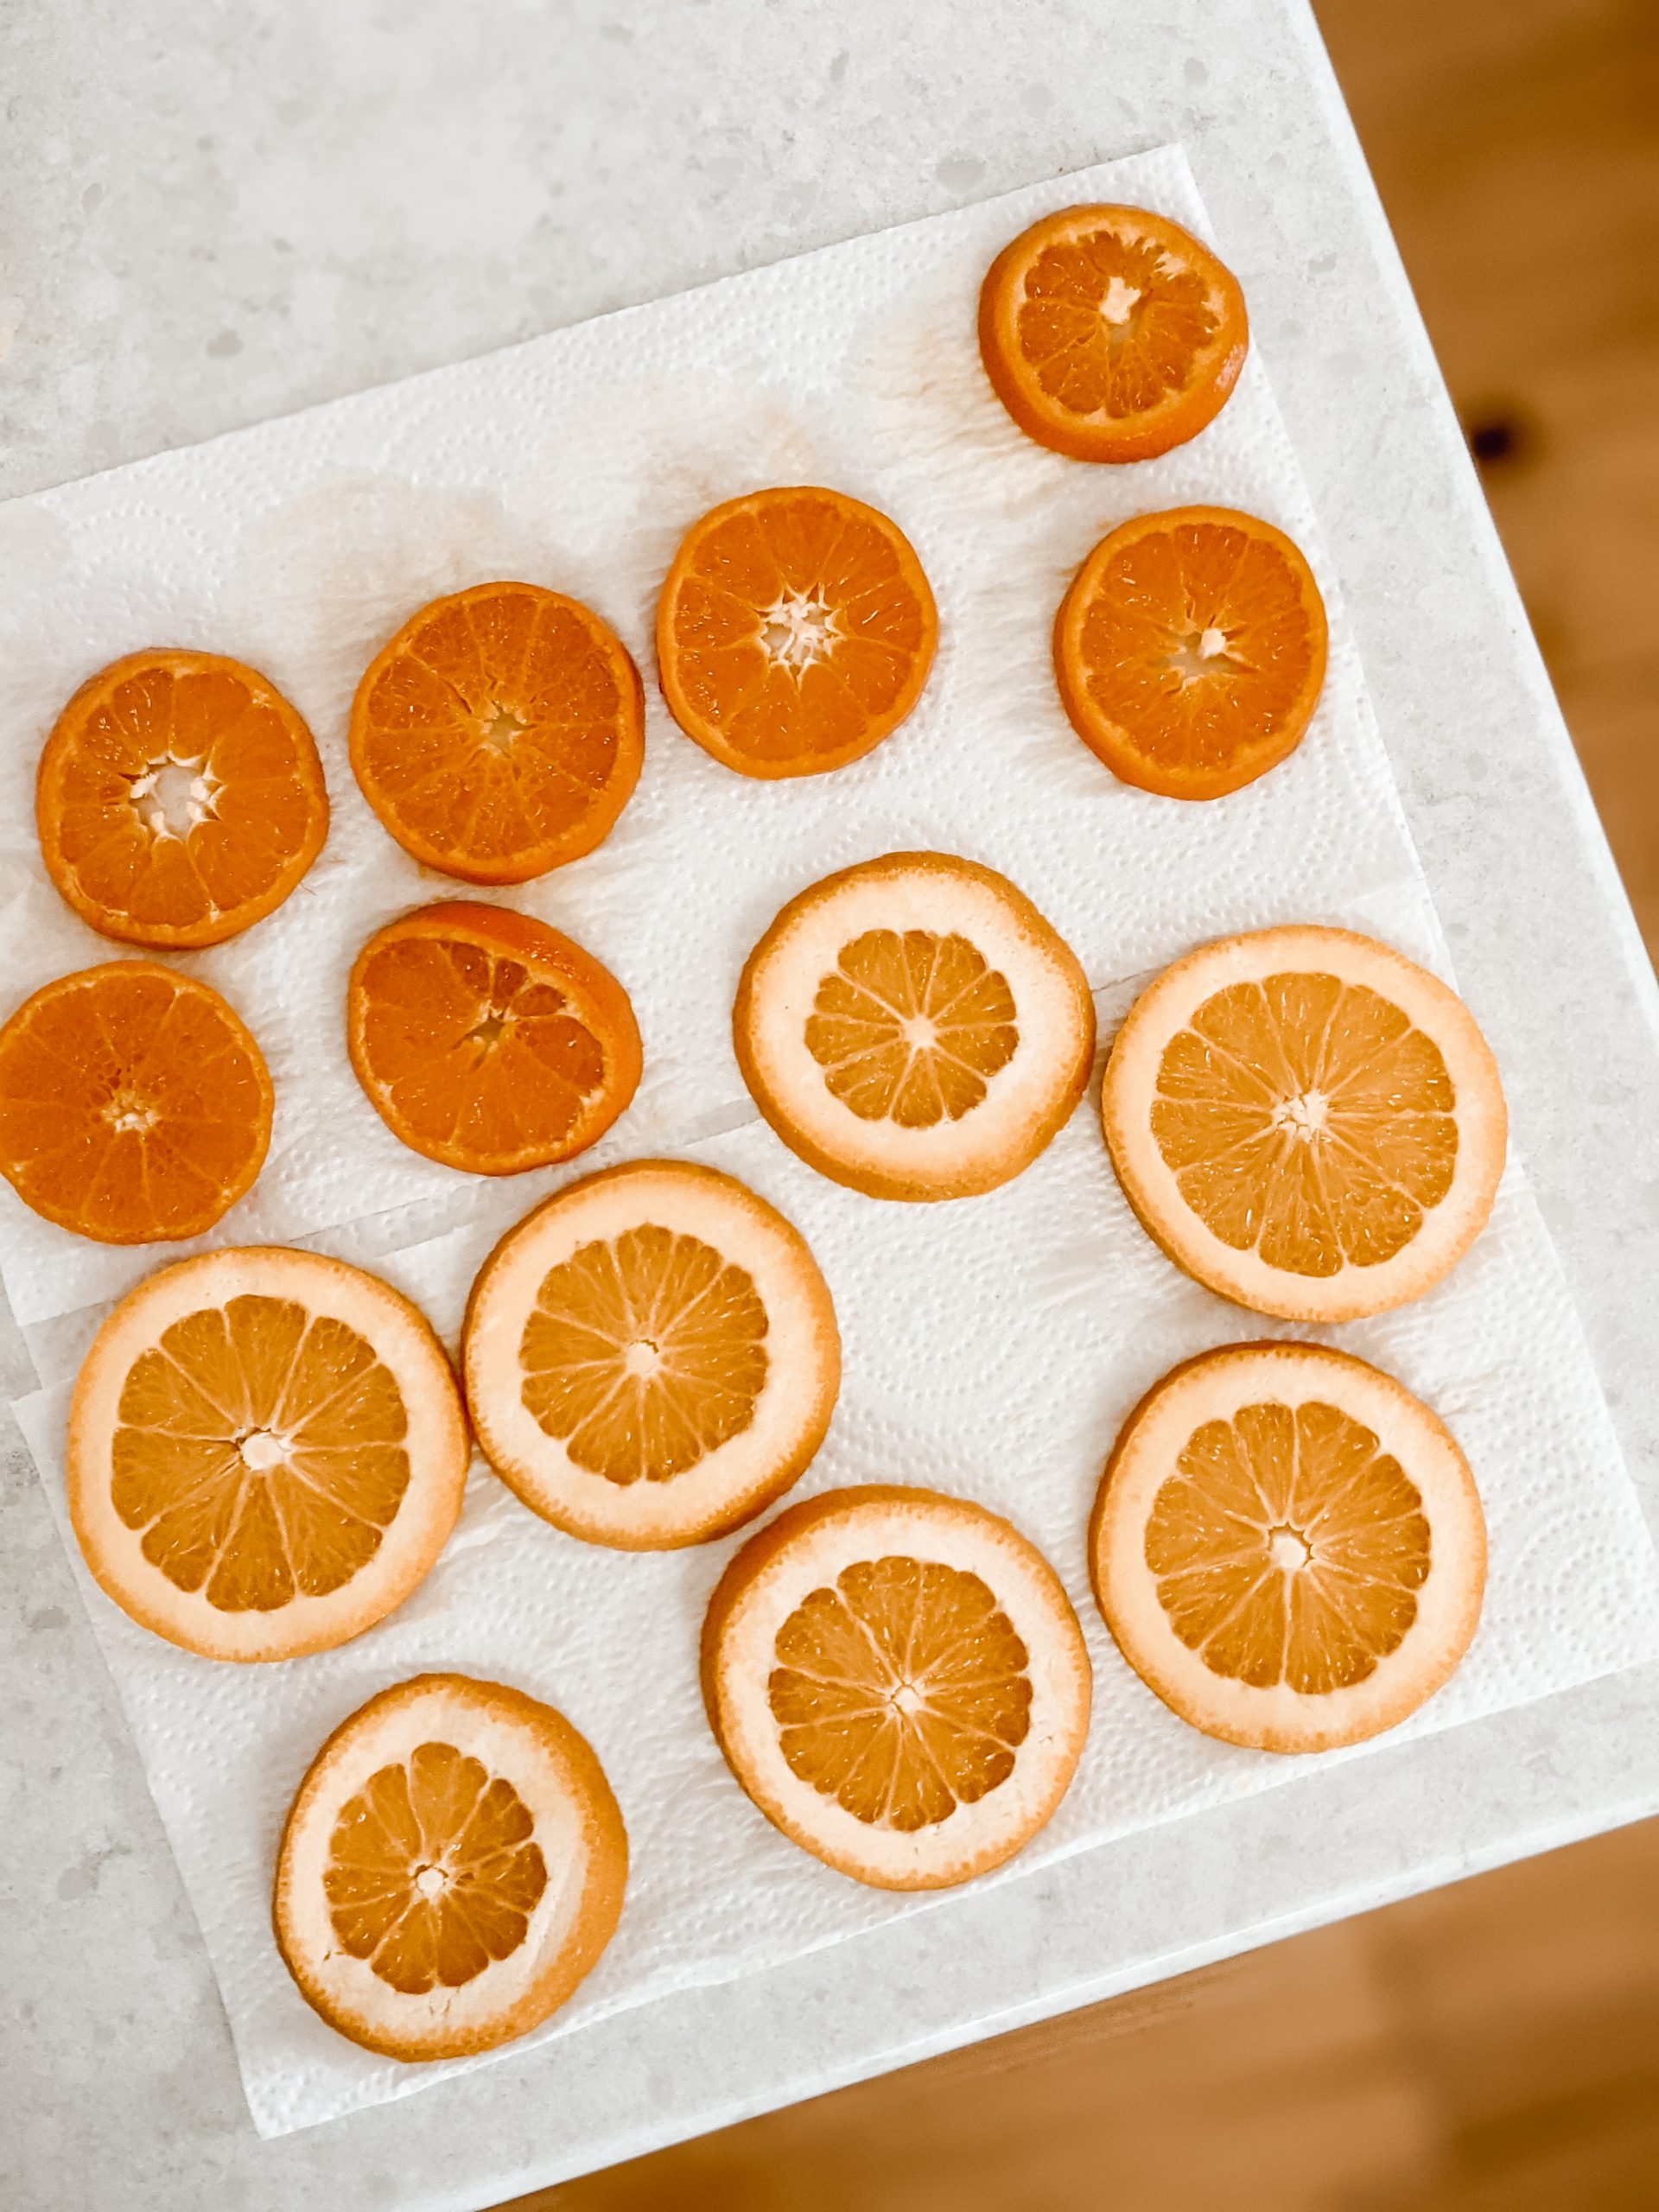 drying oranges and clementines